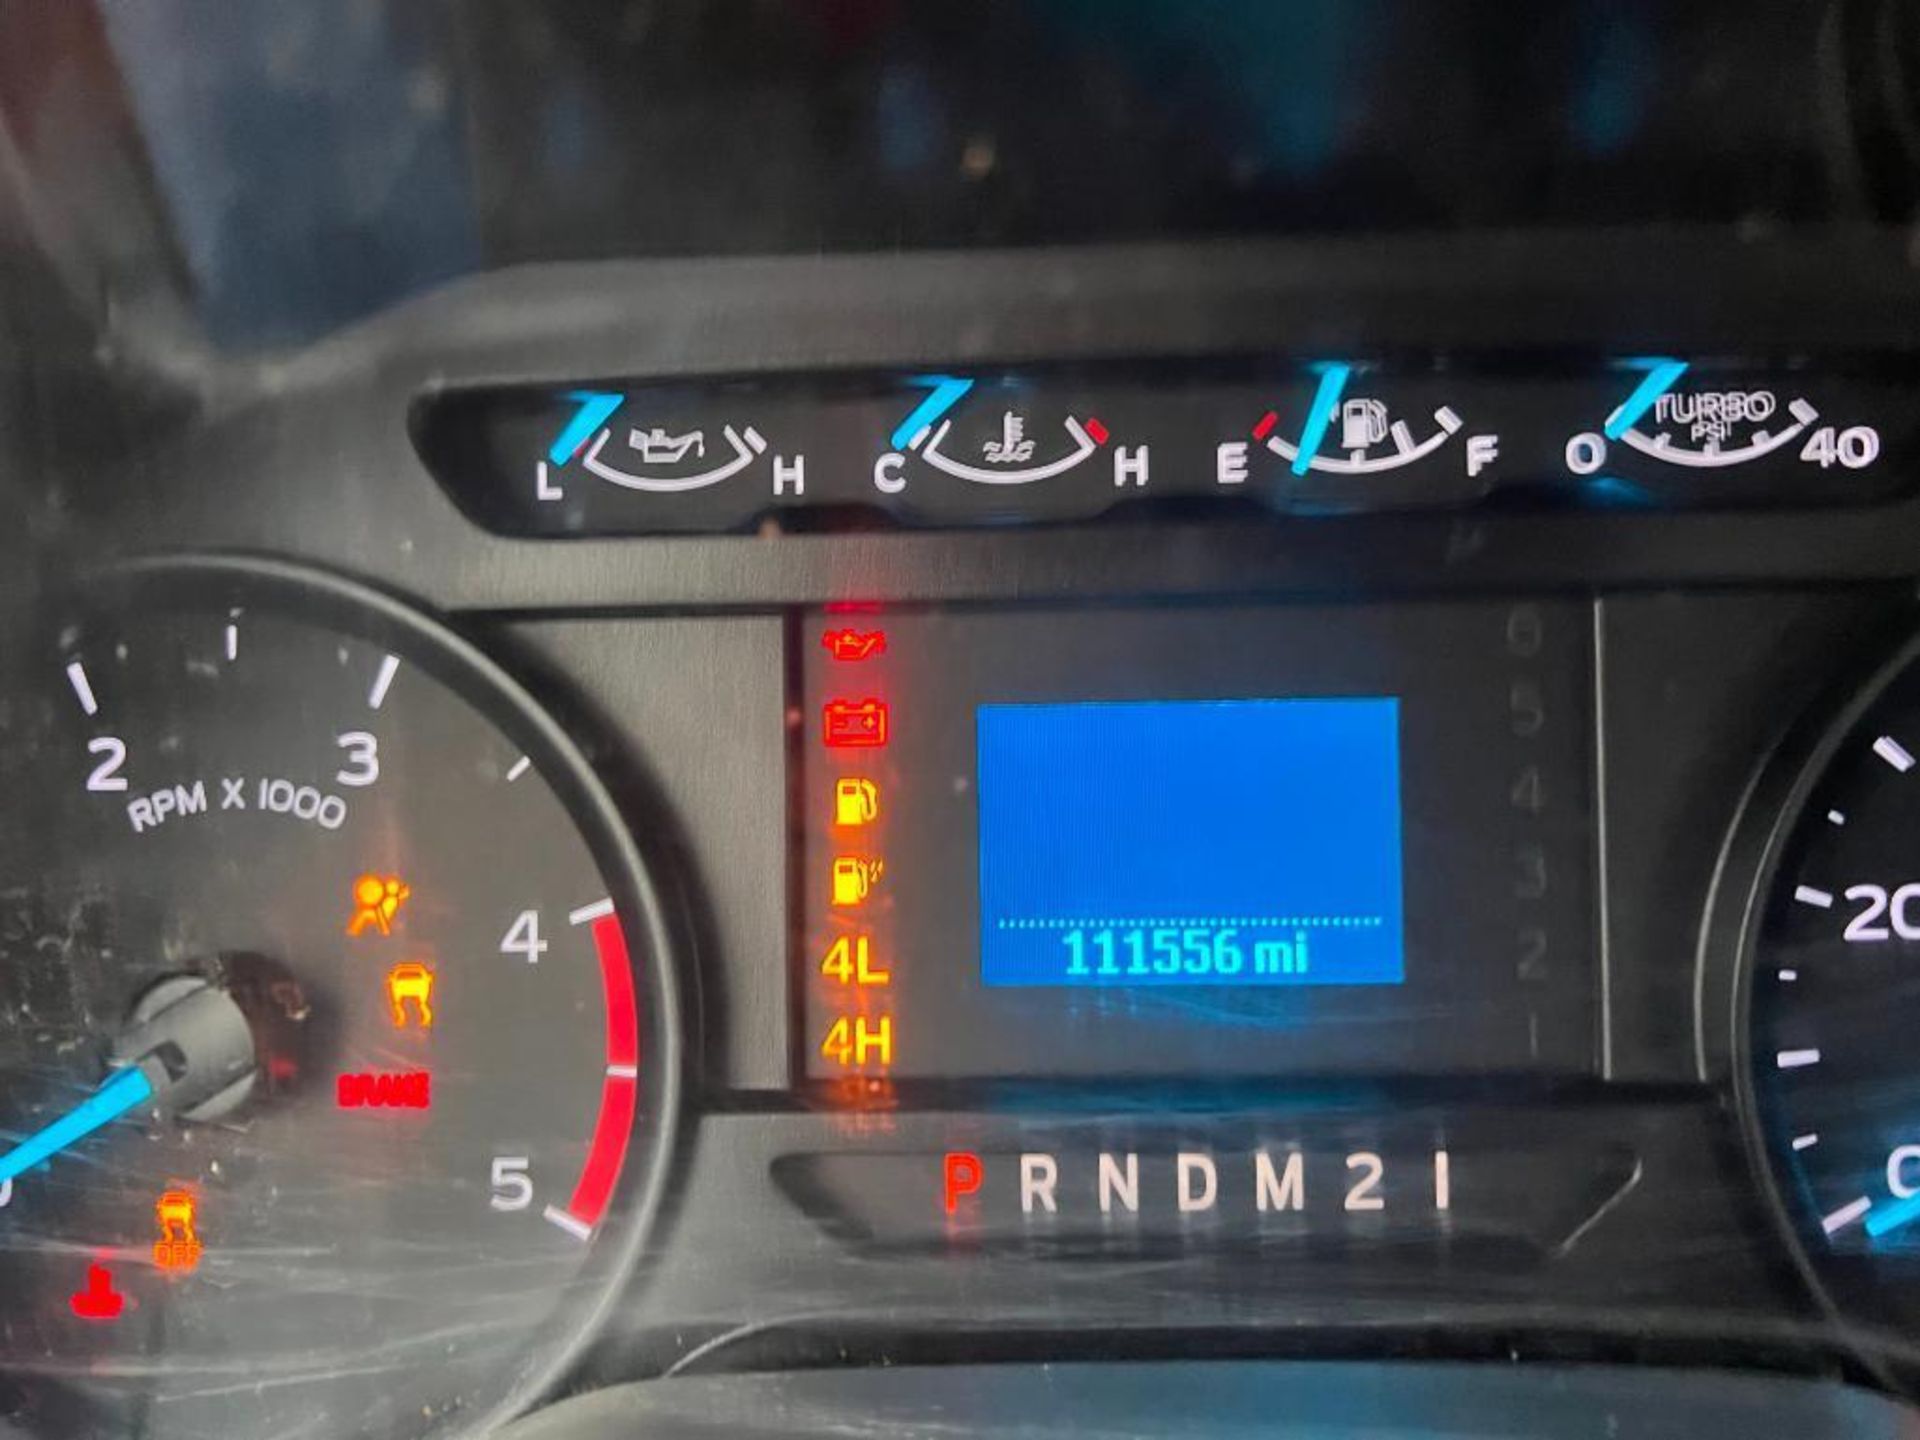 2019 Ford F550 4X4 Crew Cab Truck, VIN #1FD0W5HT1KEE51904, Miles 111,556, 6-Speed Automatic Transmis - Image 7 of 29